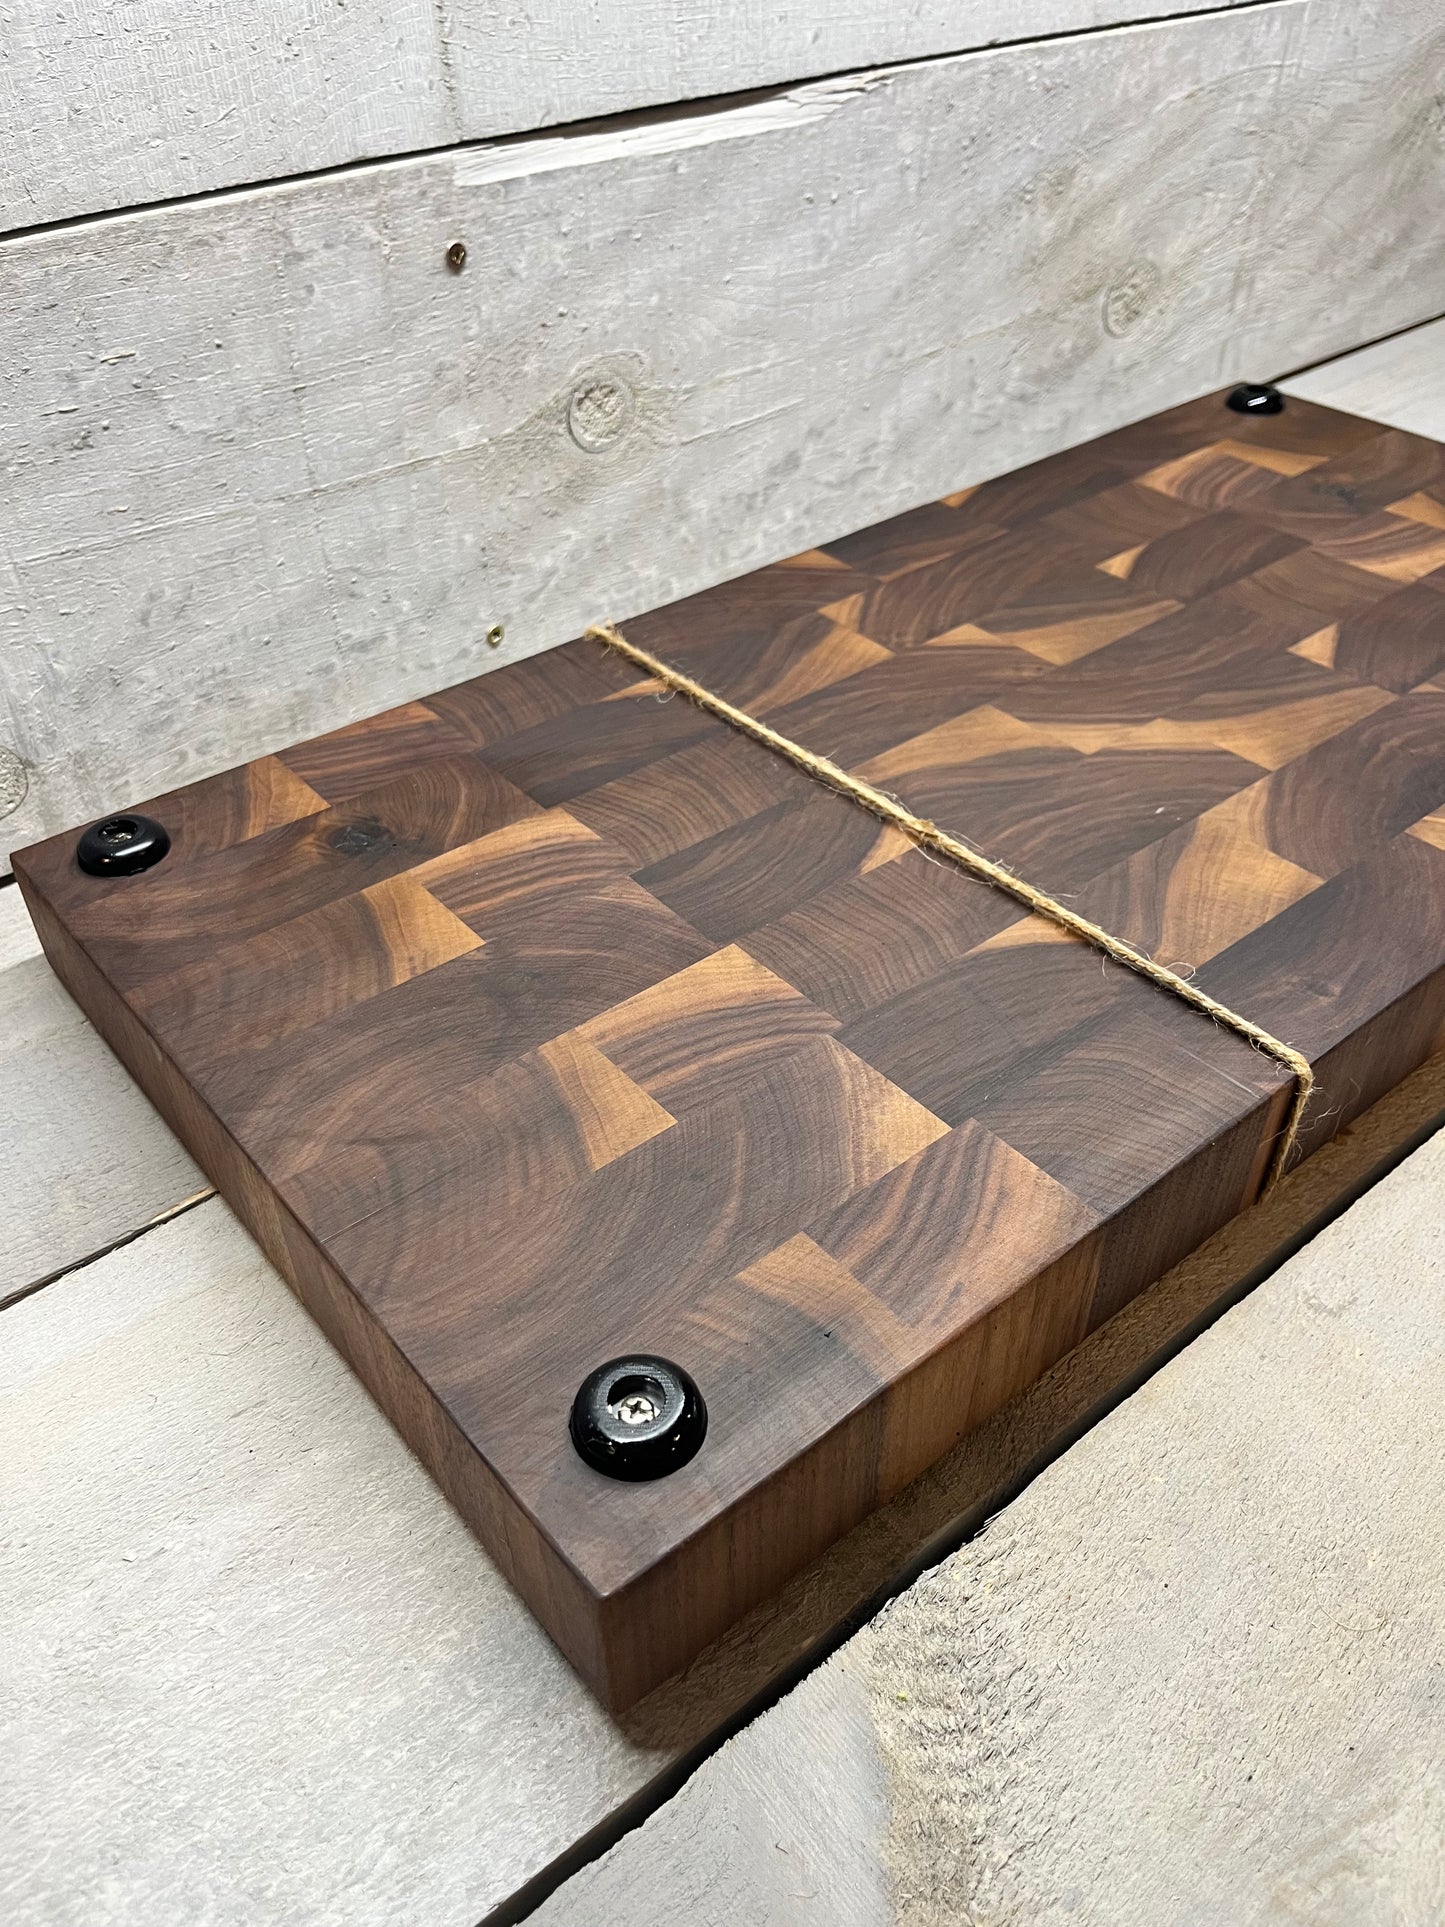 End Grain Butcher Block with a drip channel (BB100)